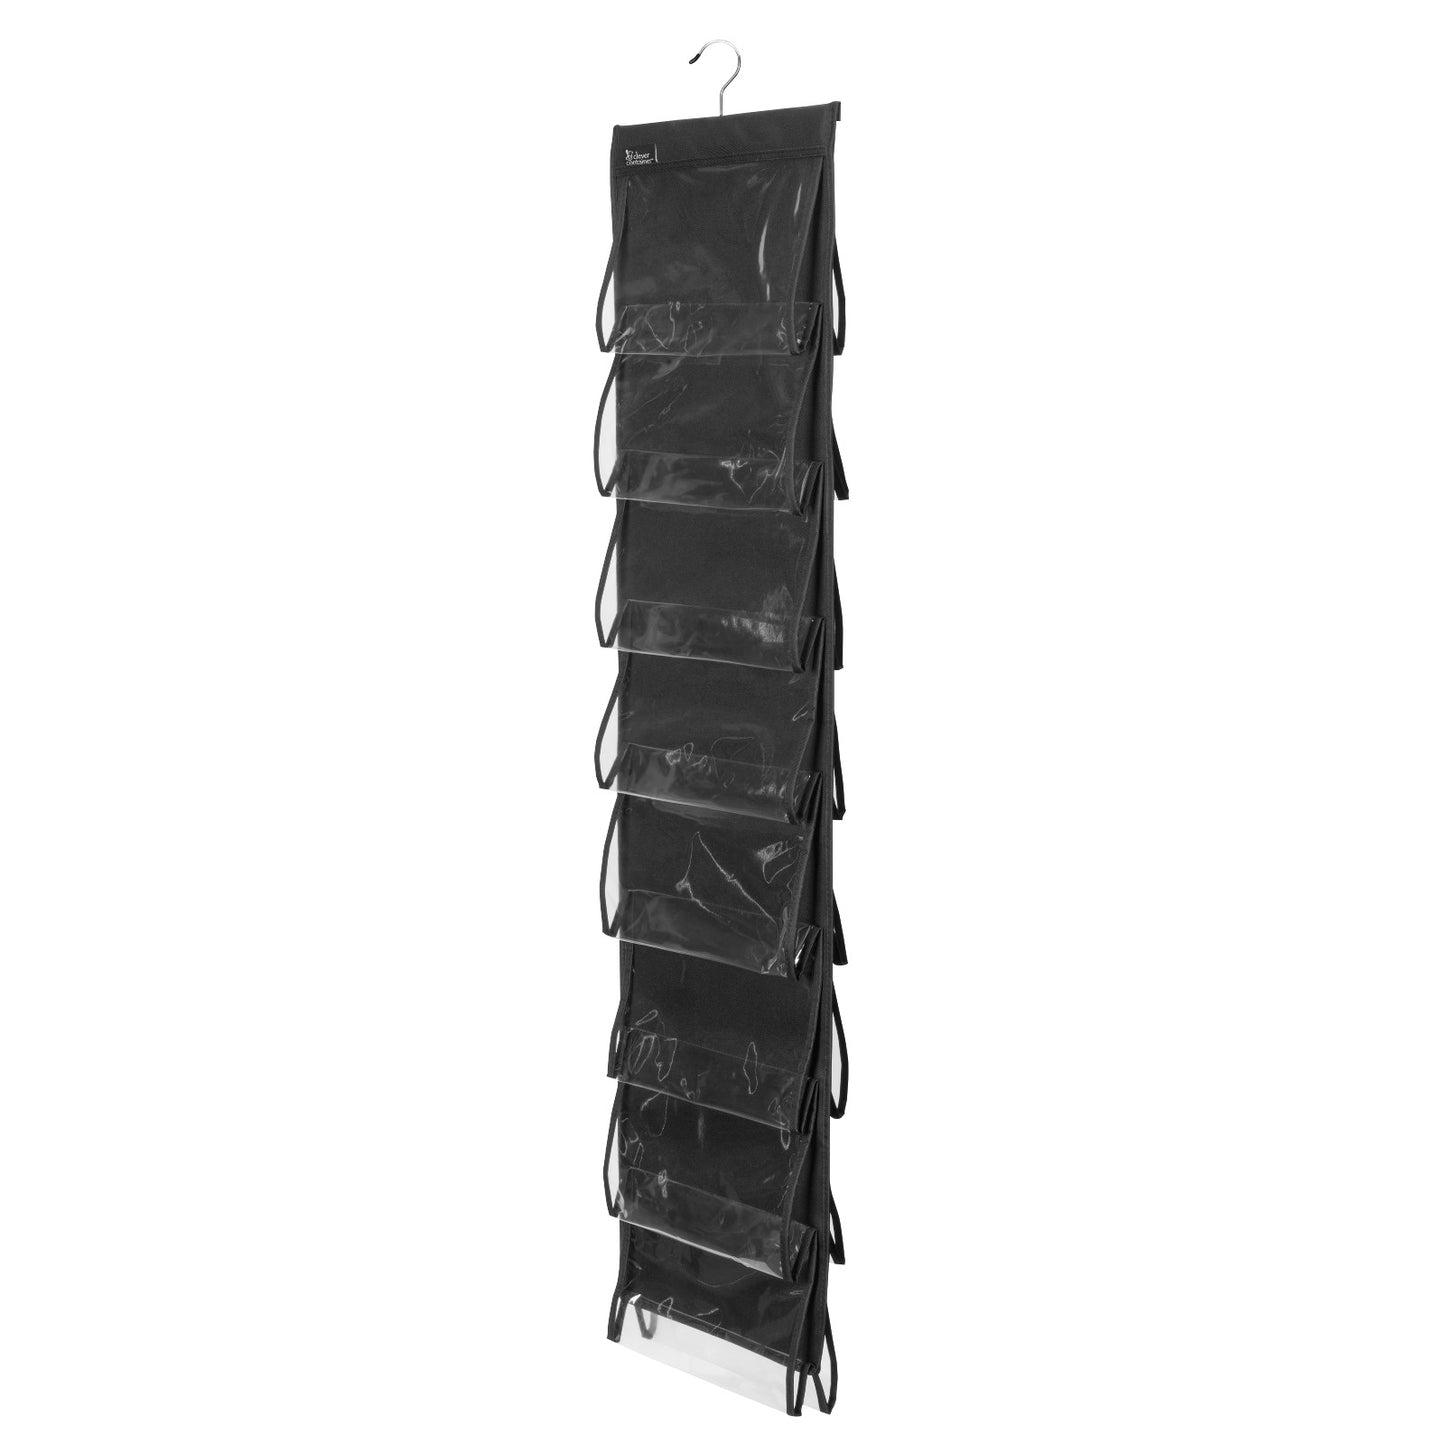 16-Pocket Cubby - Black – Clever Organizing Solutions